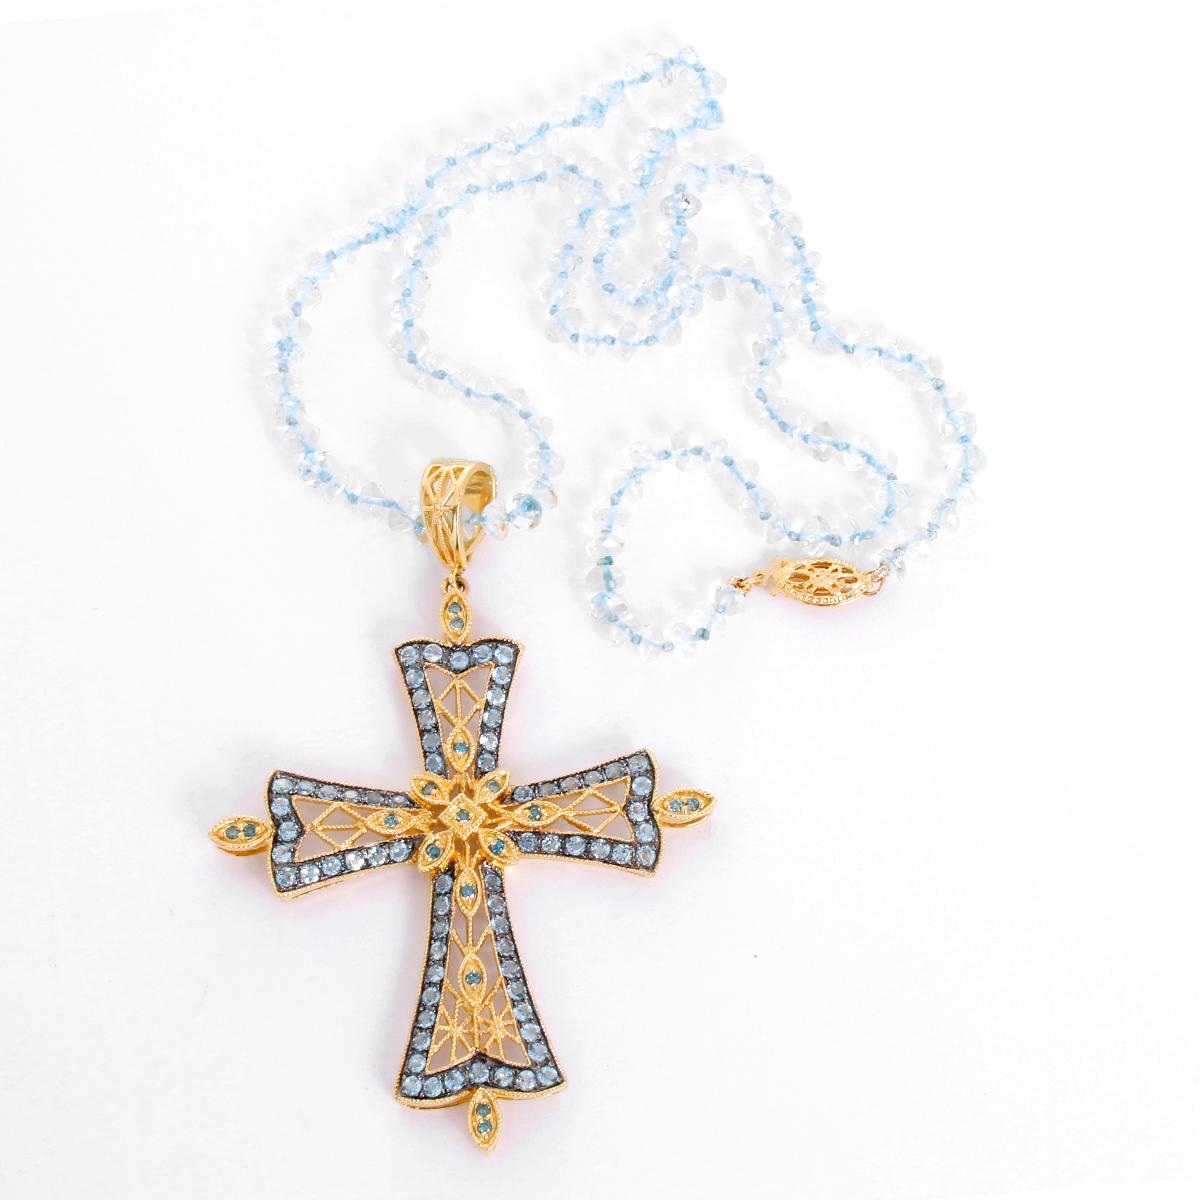 Dallas Prince Designs Blue Topaz and  Blue Diamond Cross Necklace - . This necklace designed by Dallas Prince Designs features a cross pendant with a hinged removable bail. Pendant has 18 blue diamonds (0.36 ct.) in the center and at cross tips and